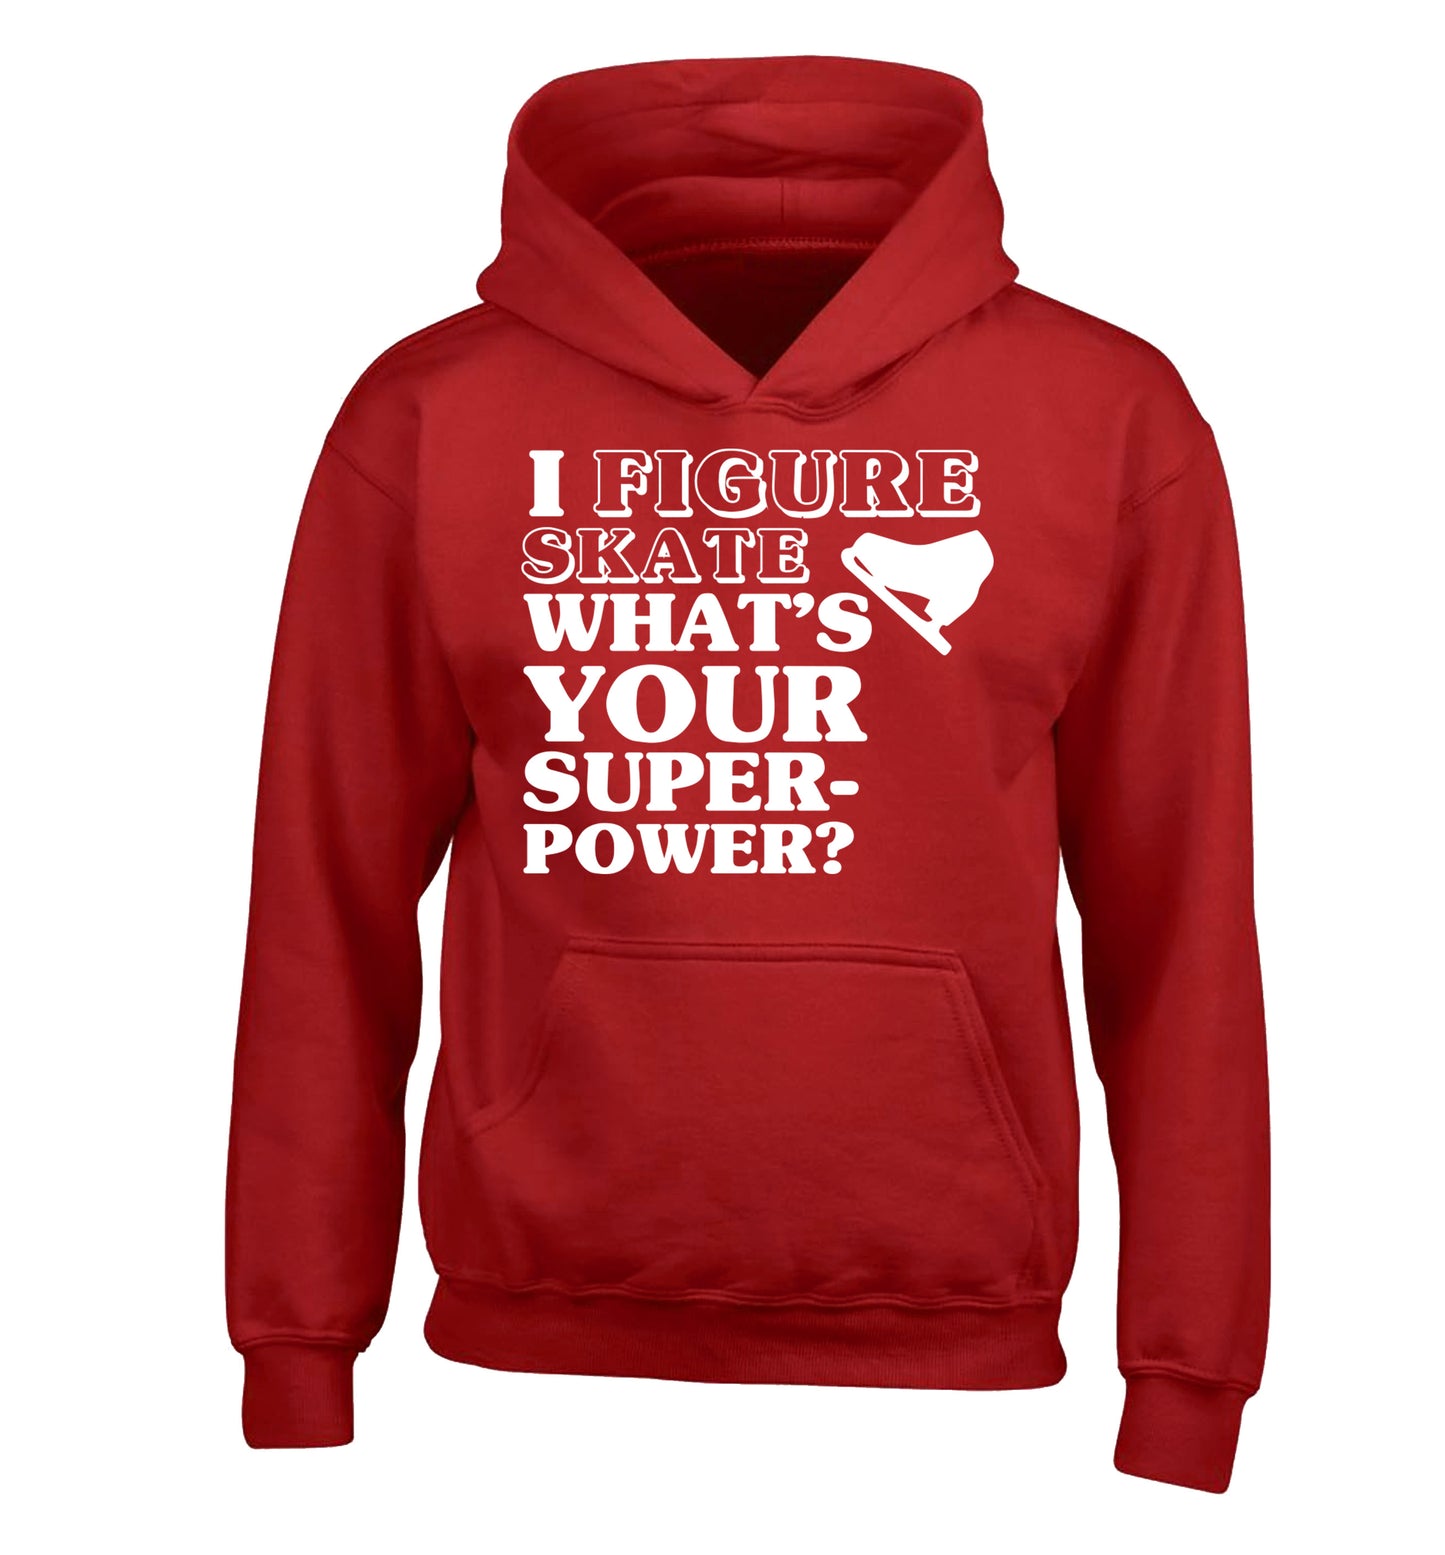 I figure skate what's your superpower? children's red hoodie 12-14 Years